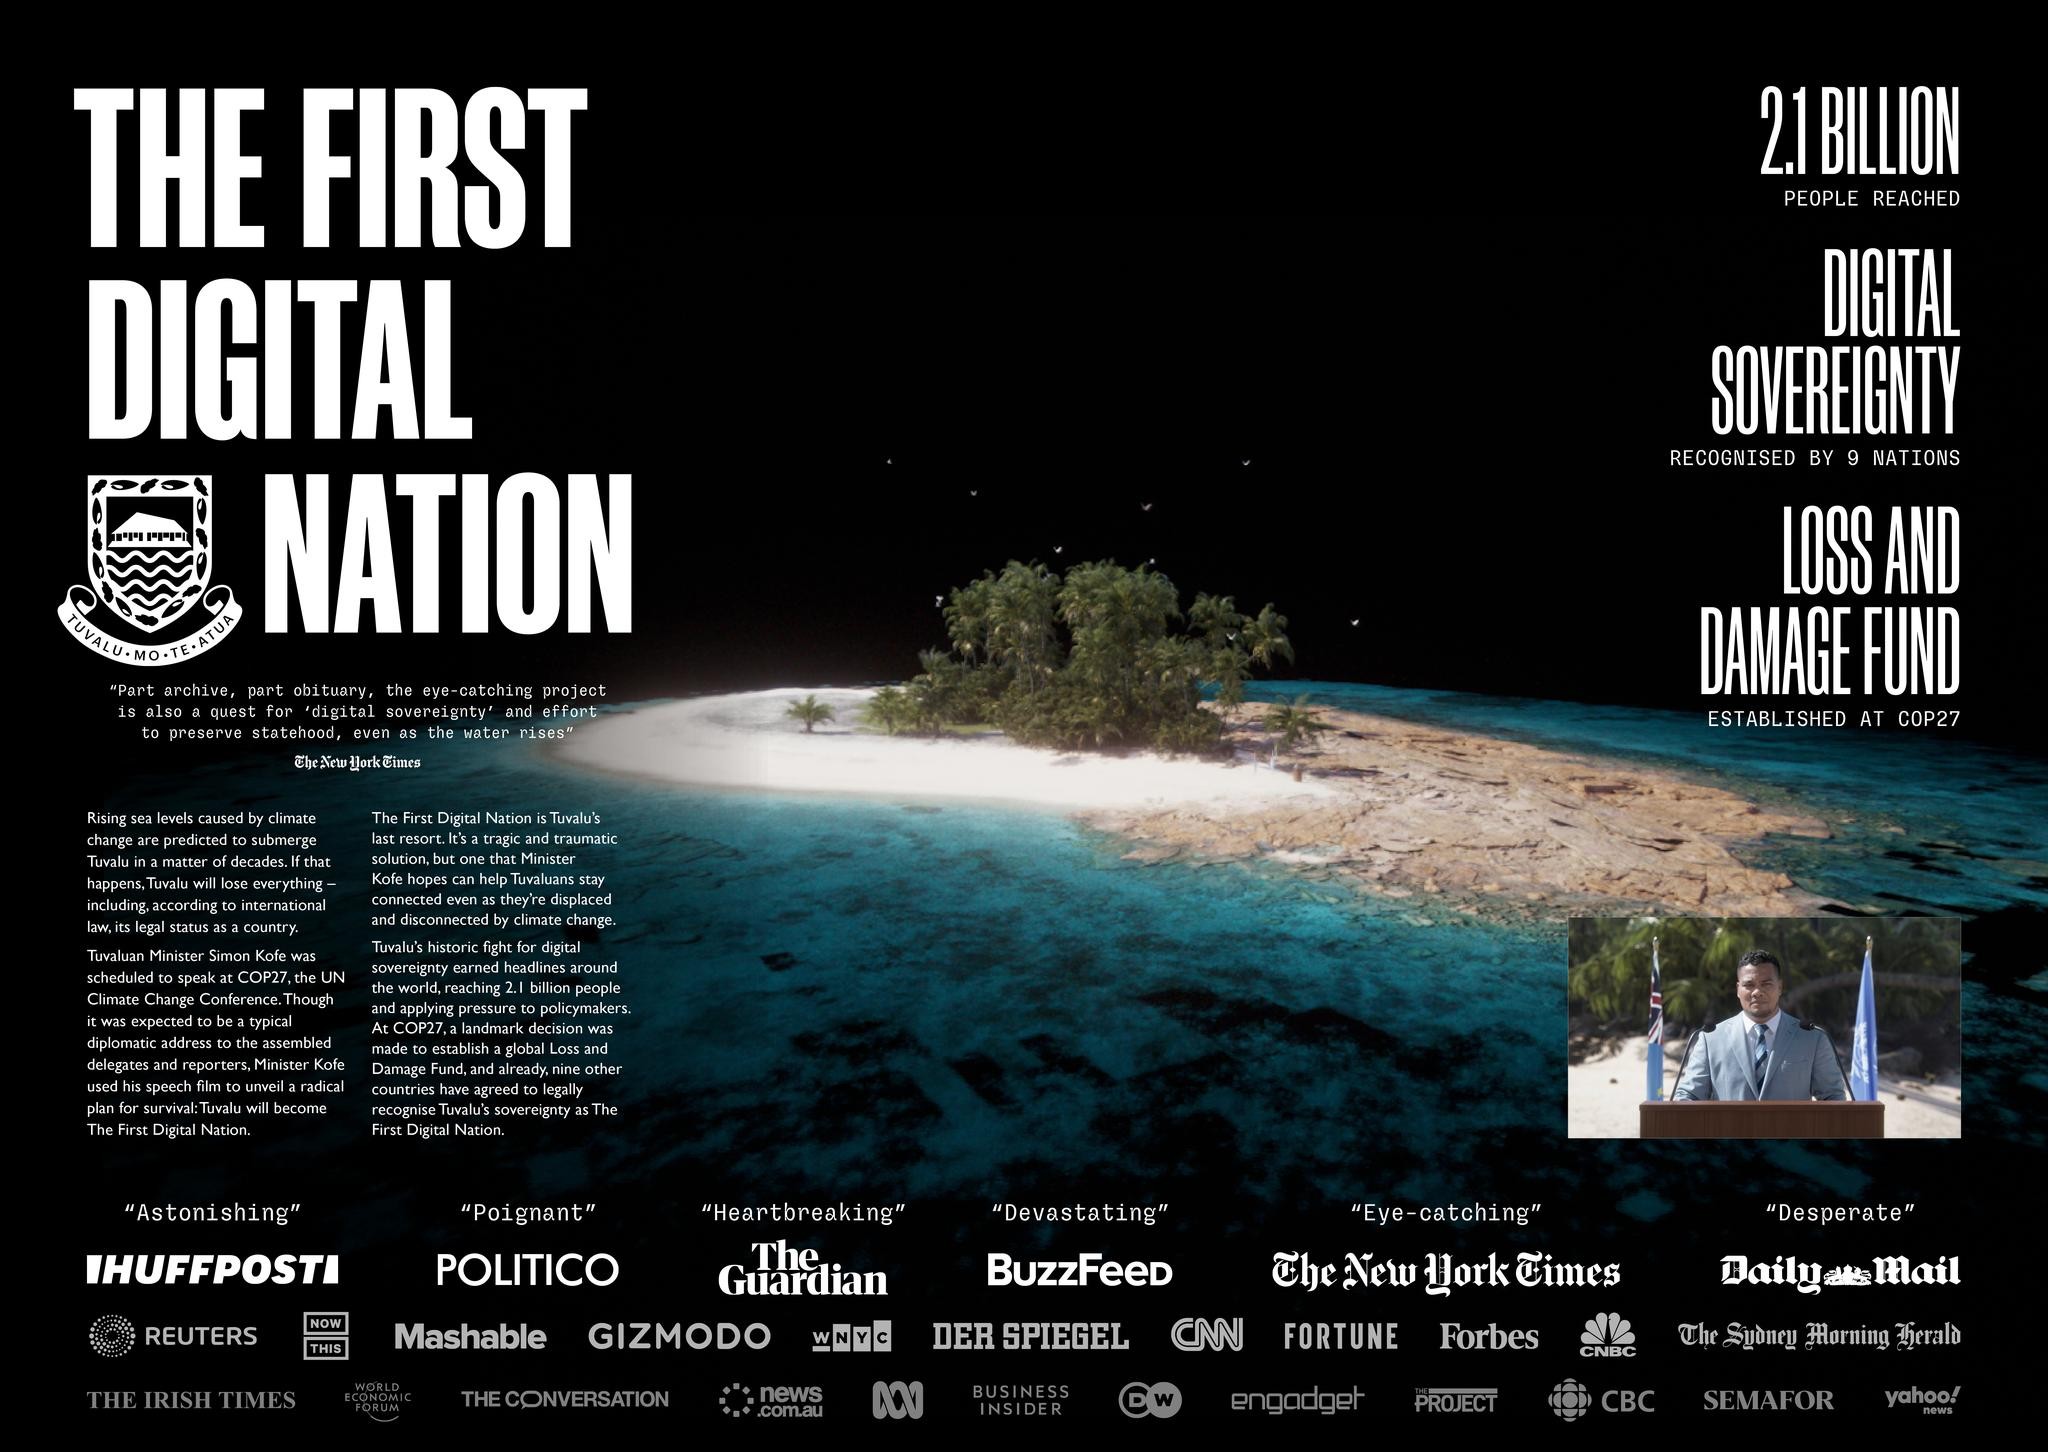 THE FIRST DIGITAL NATION